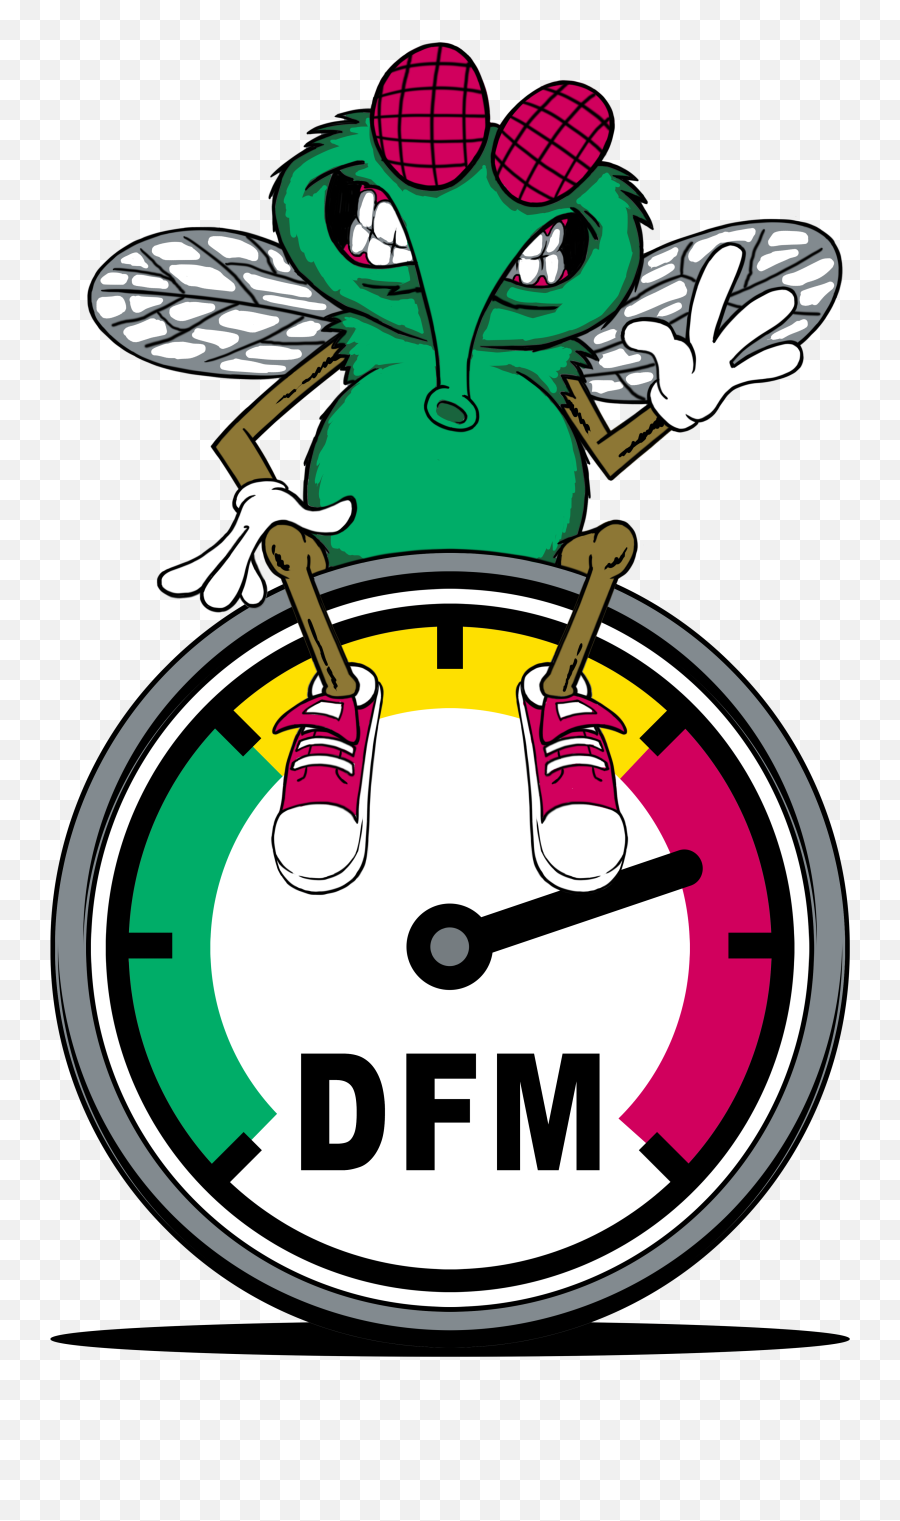 Dfm Damn Fly Meter How Bad Are The Flies At The Beach - For Bicycle Emoji,Toilet And Broken Heart Emoji